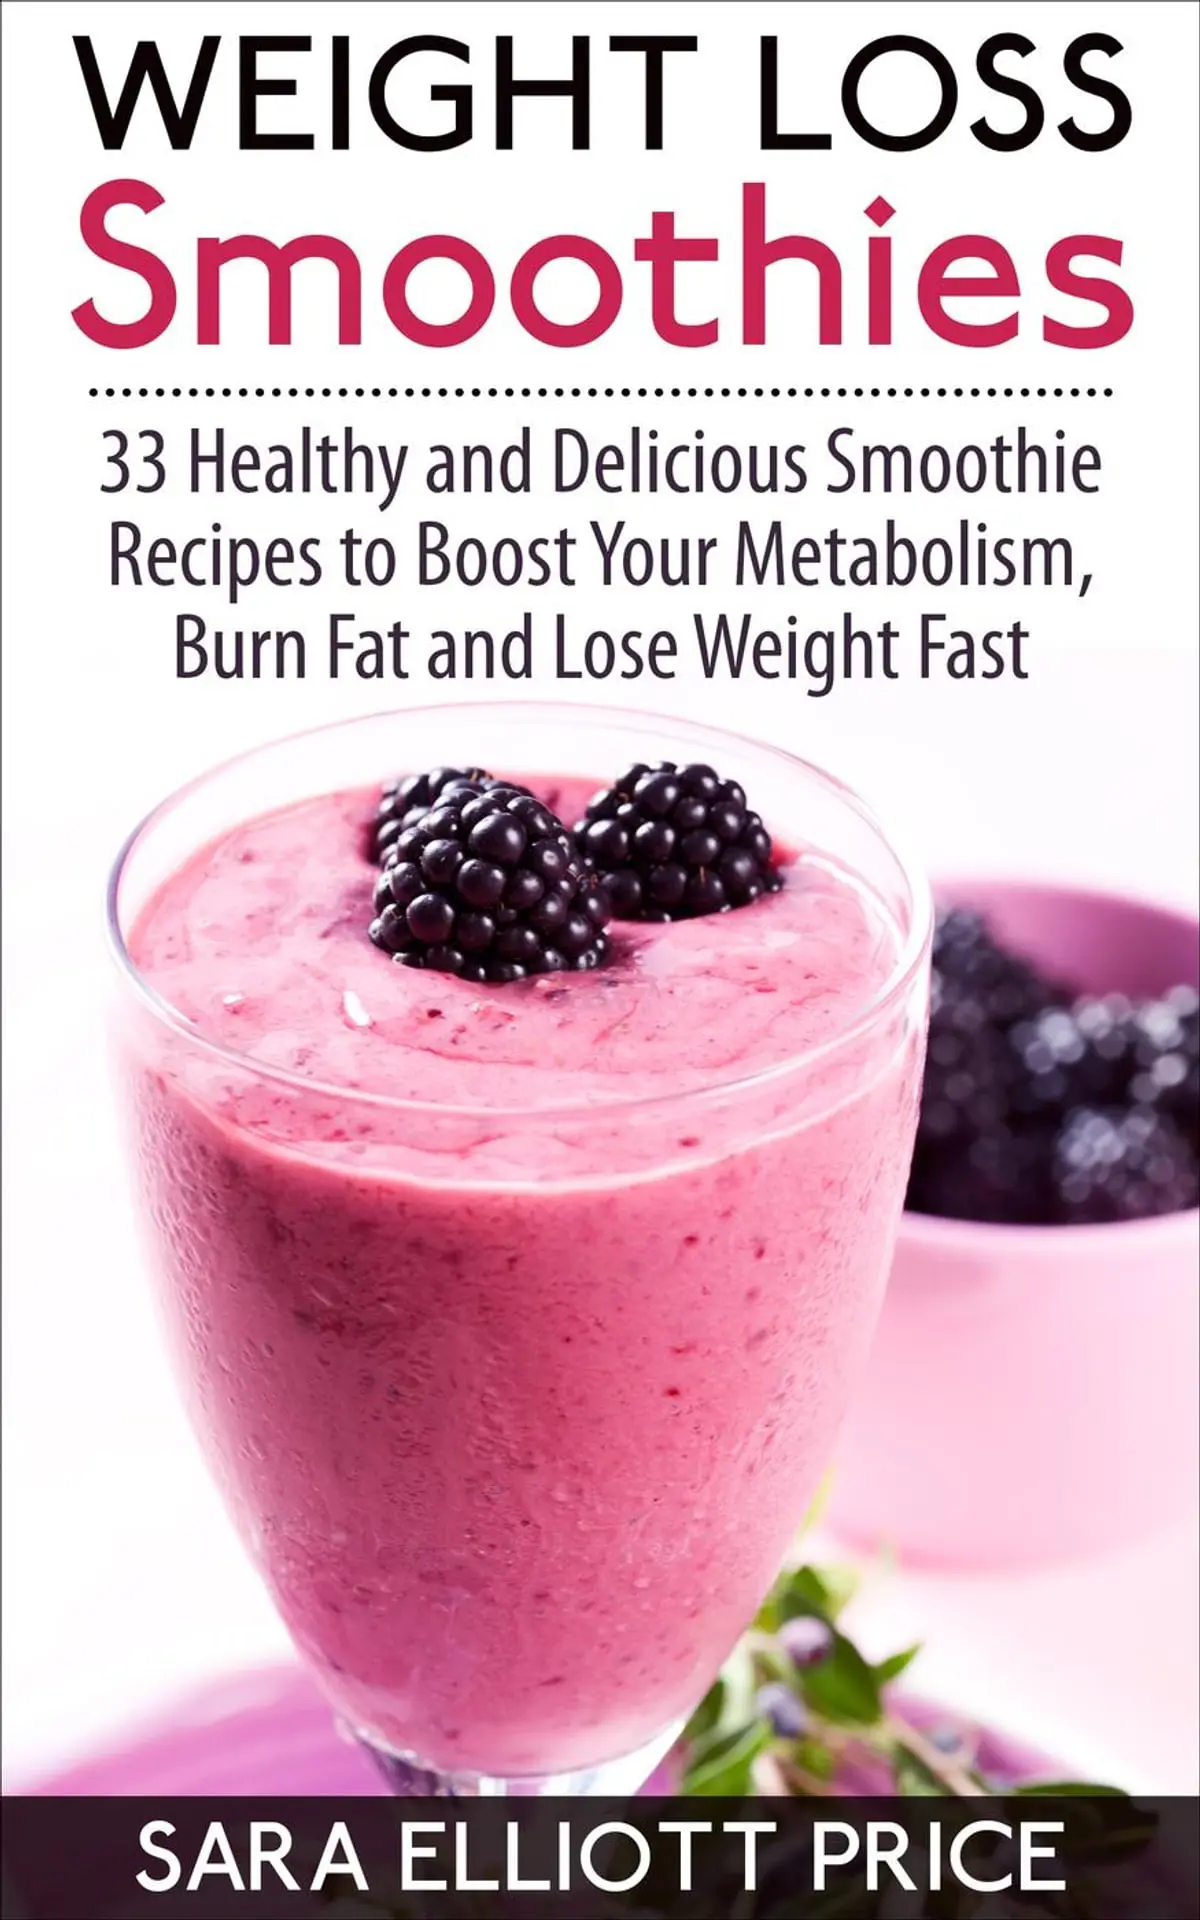 Weight Loss Smoothies: 33 Healthy and Delicious Smoothie Recipes to Boost Your Metabolism, Burn Fat and Lose Weight Fast eBook by Sara Elliott Price - EPUB | Rakuten Kobo United States